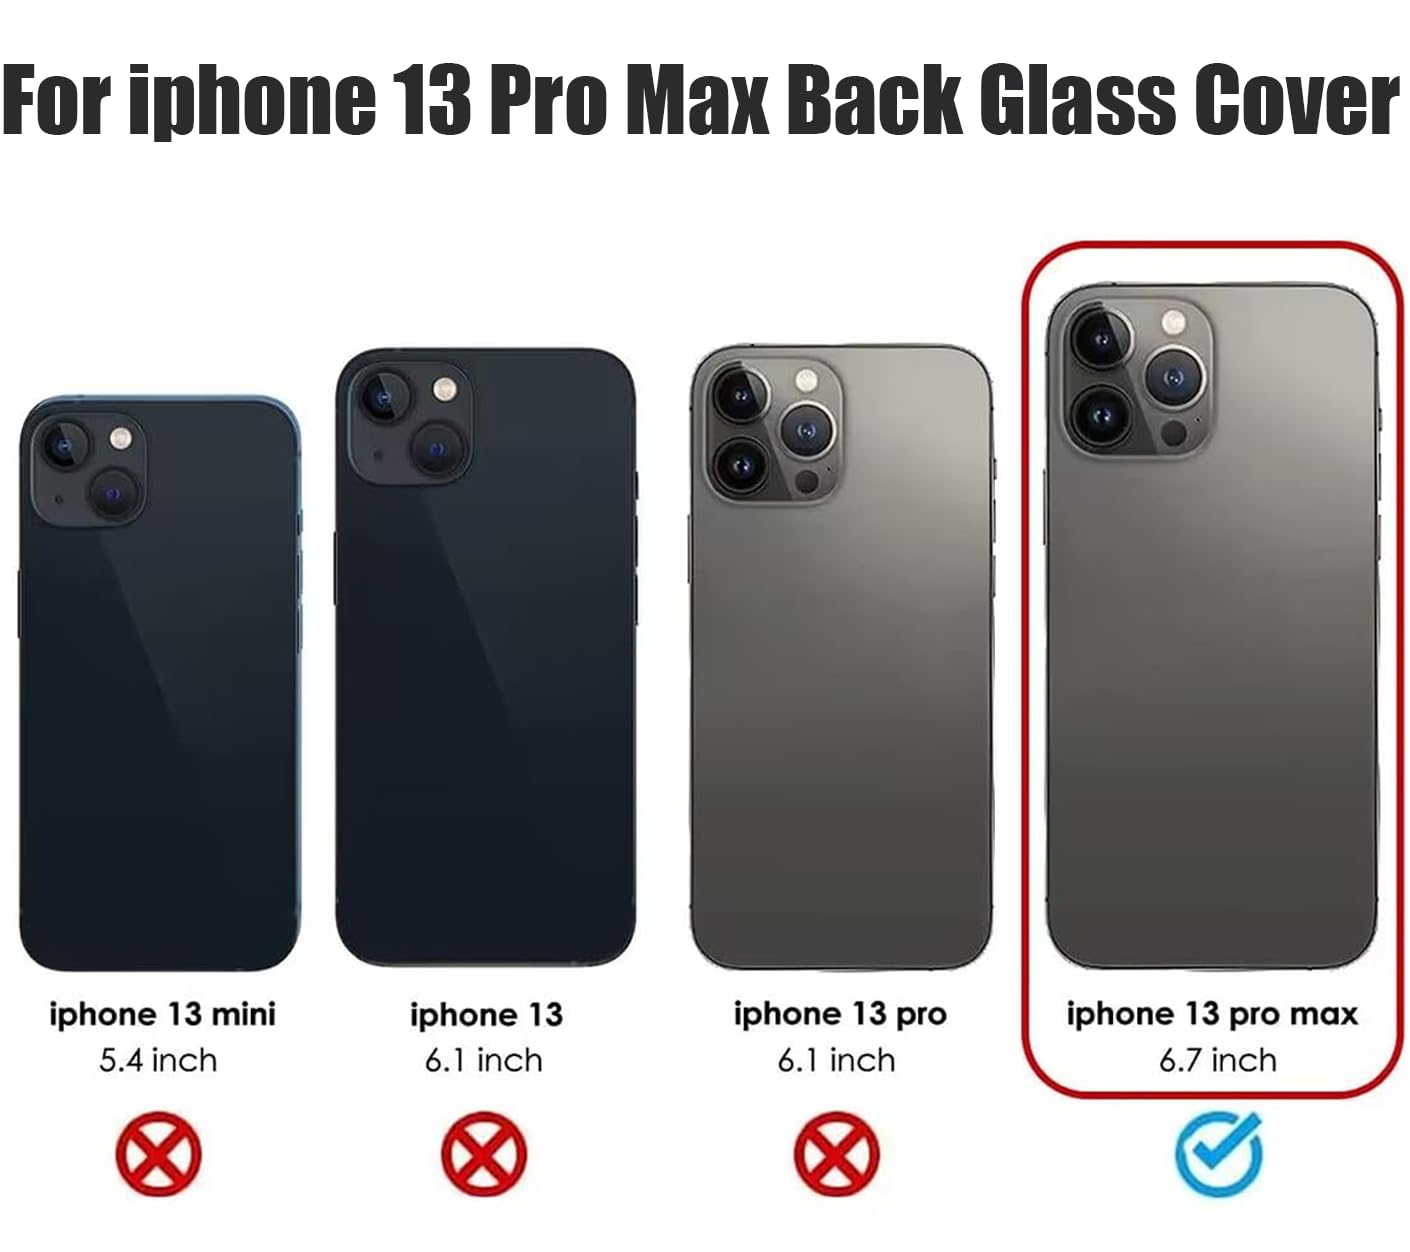 Mingxiong 13 Pro Max Back Glass Replacement for iPhone 13 Pro Max Rear Back Glass Panel Replacement with Pre-Installed Adhesive + Reparing Toolkit (Black)